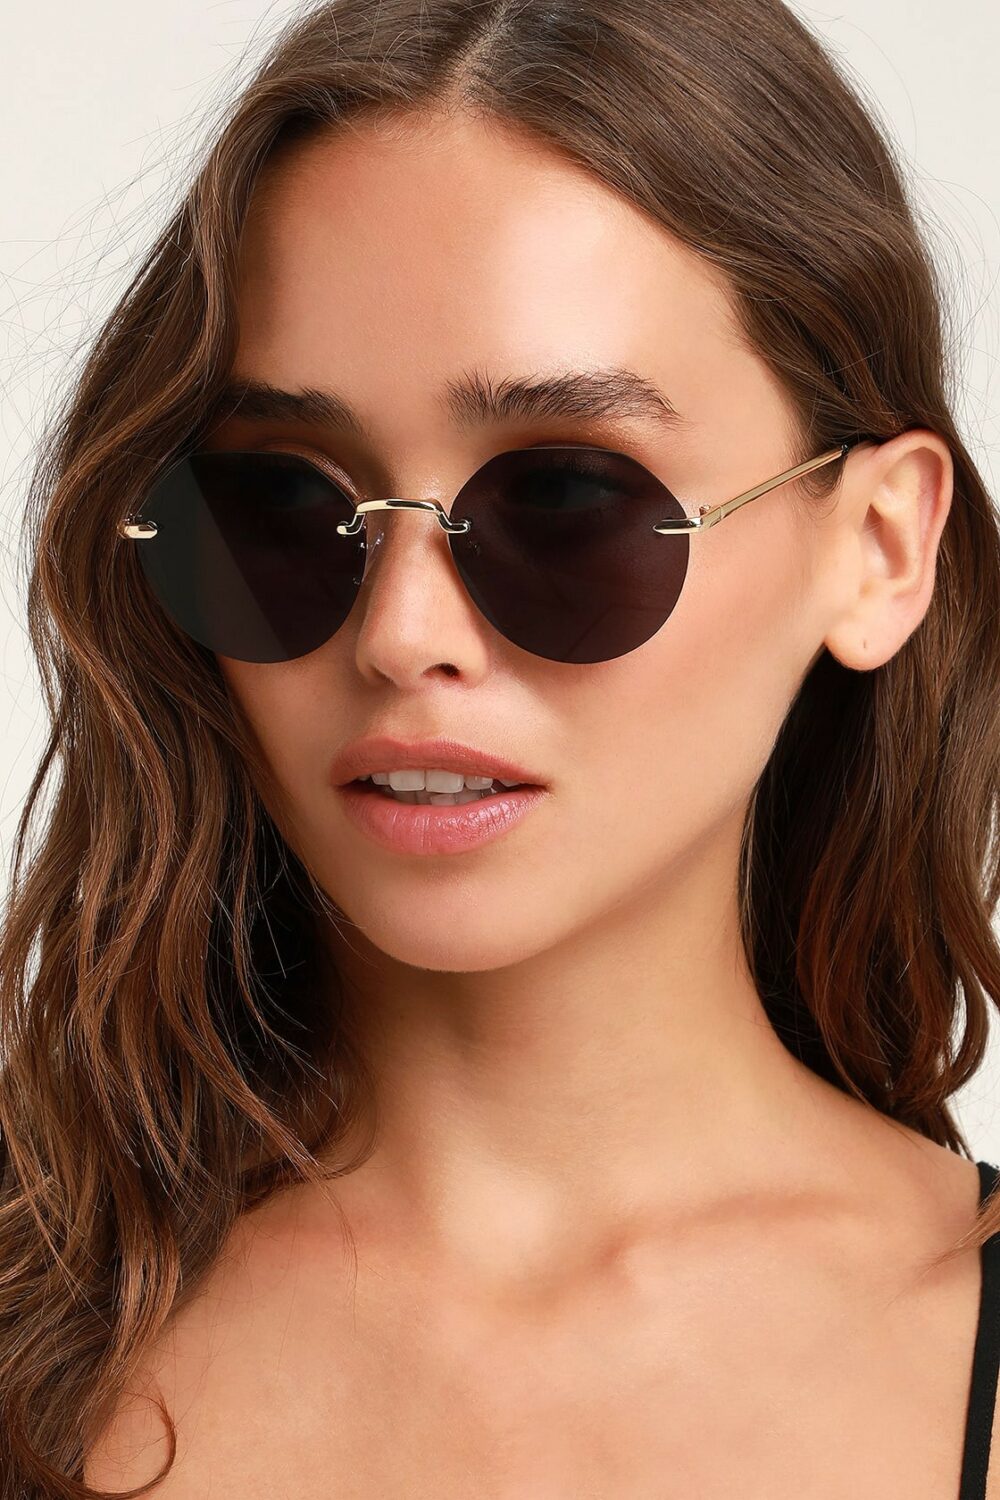 Sunglasses for a Brunch Date on a Sunday kick off the weekend in style. These chic shades are a unique round form and include black tinted lenses.